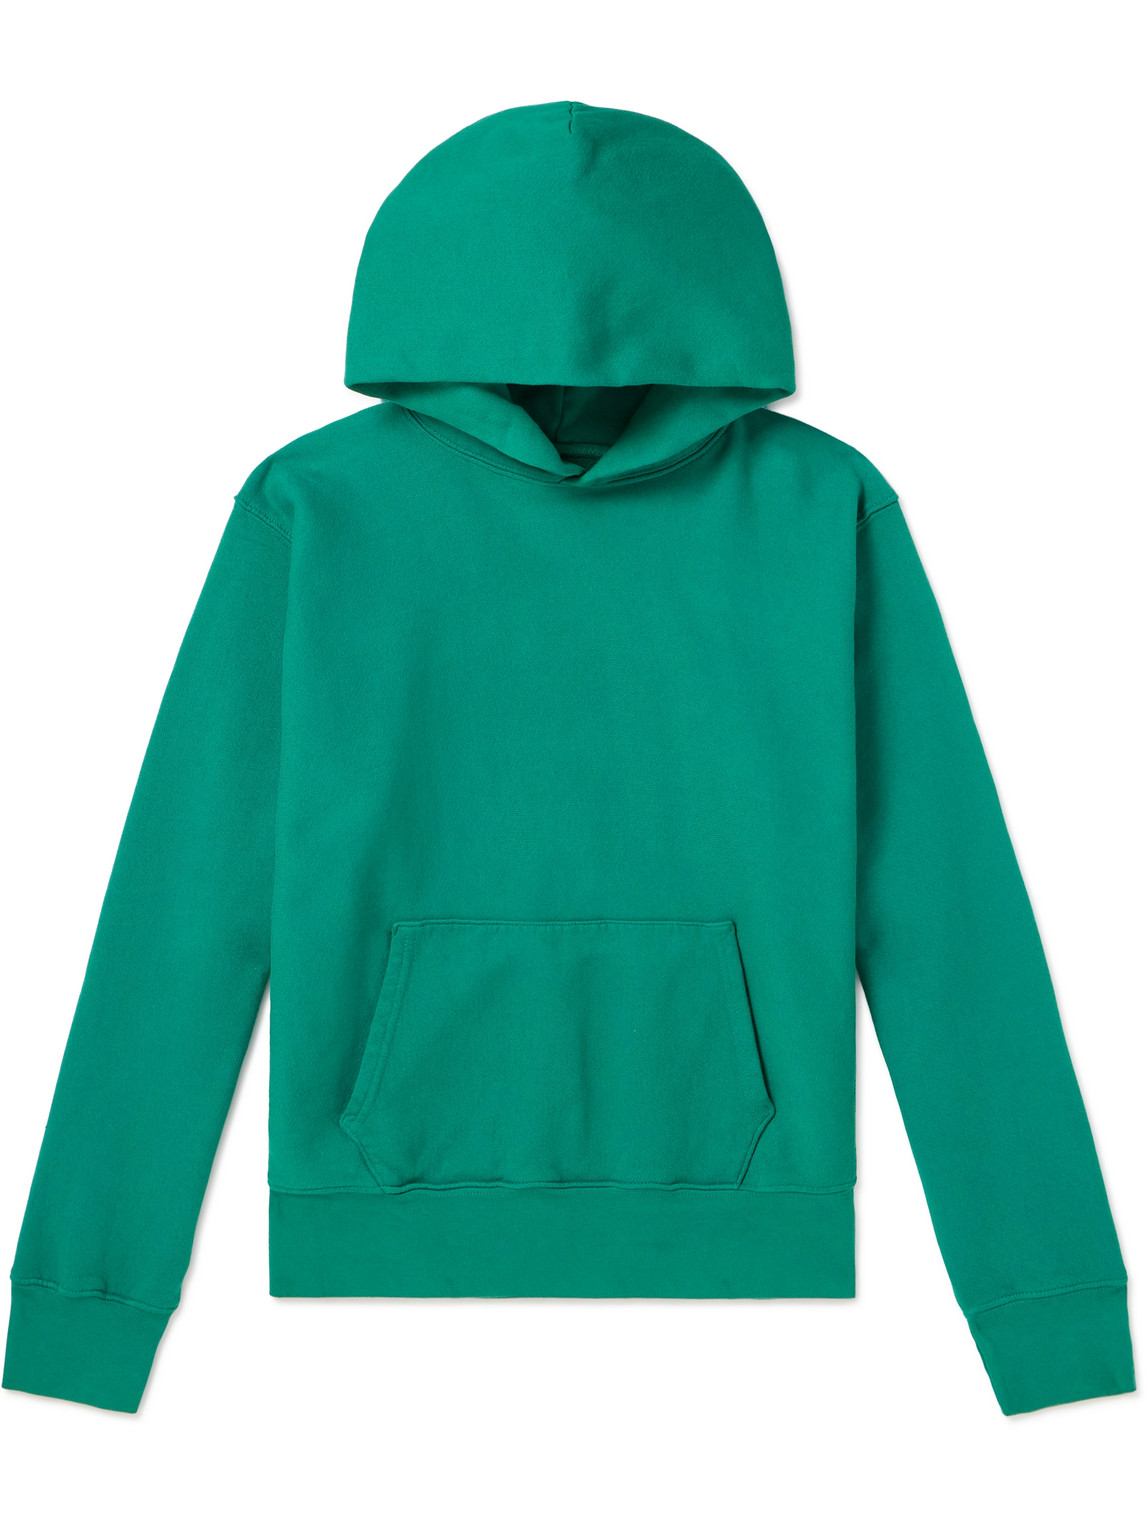 Garment-Dyed Cotton-Jersey Hoodie